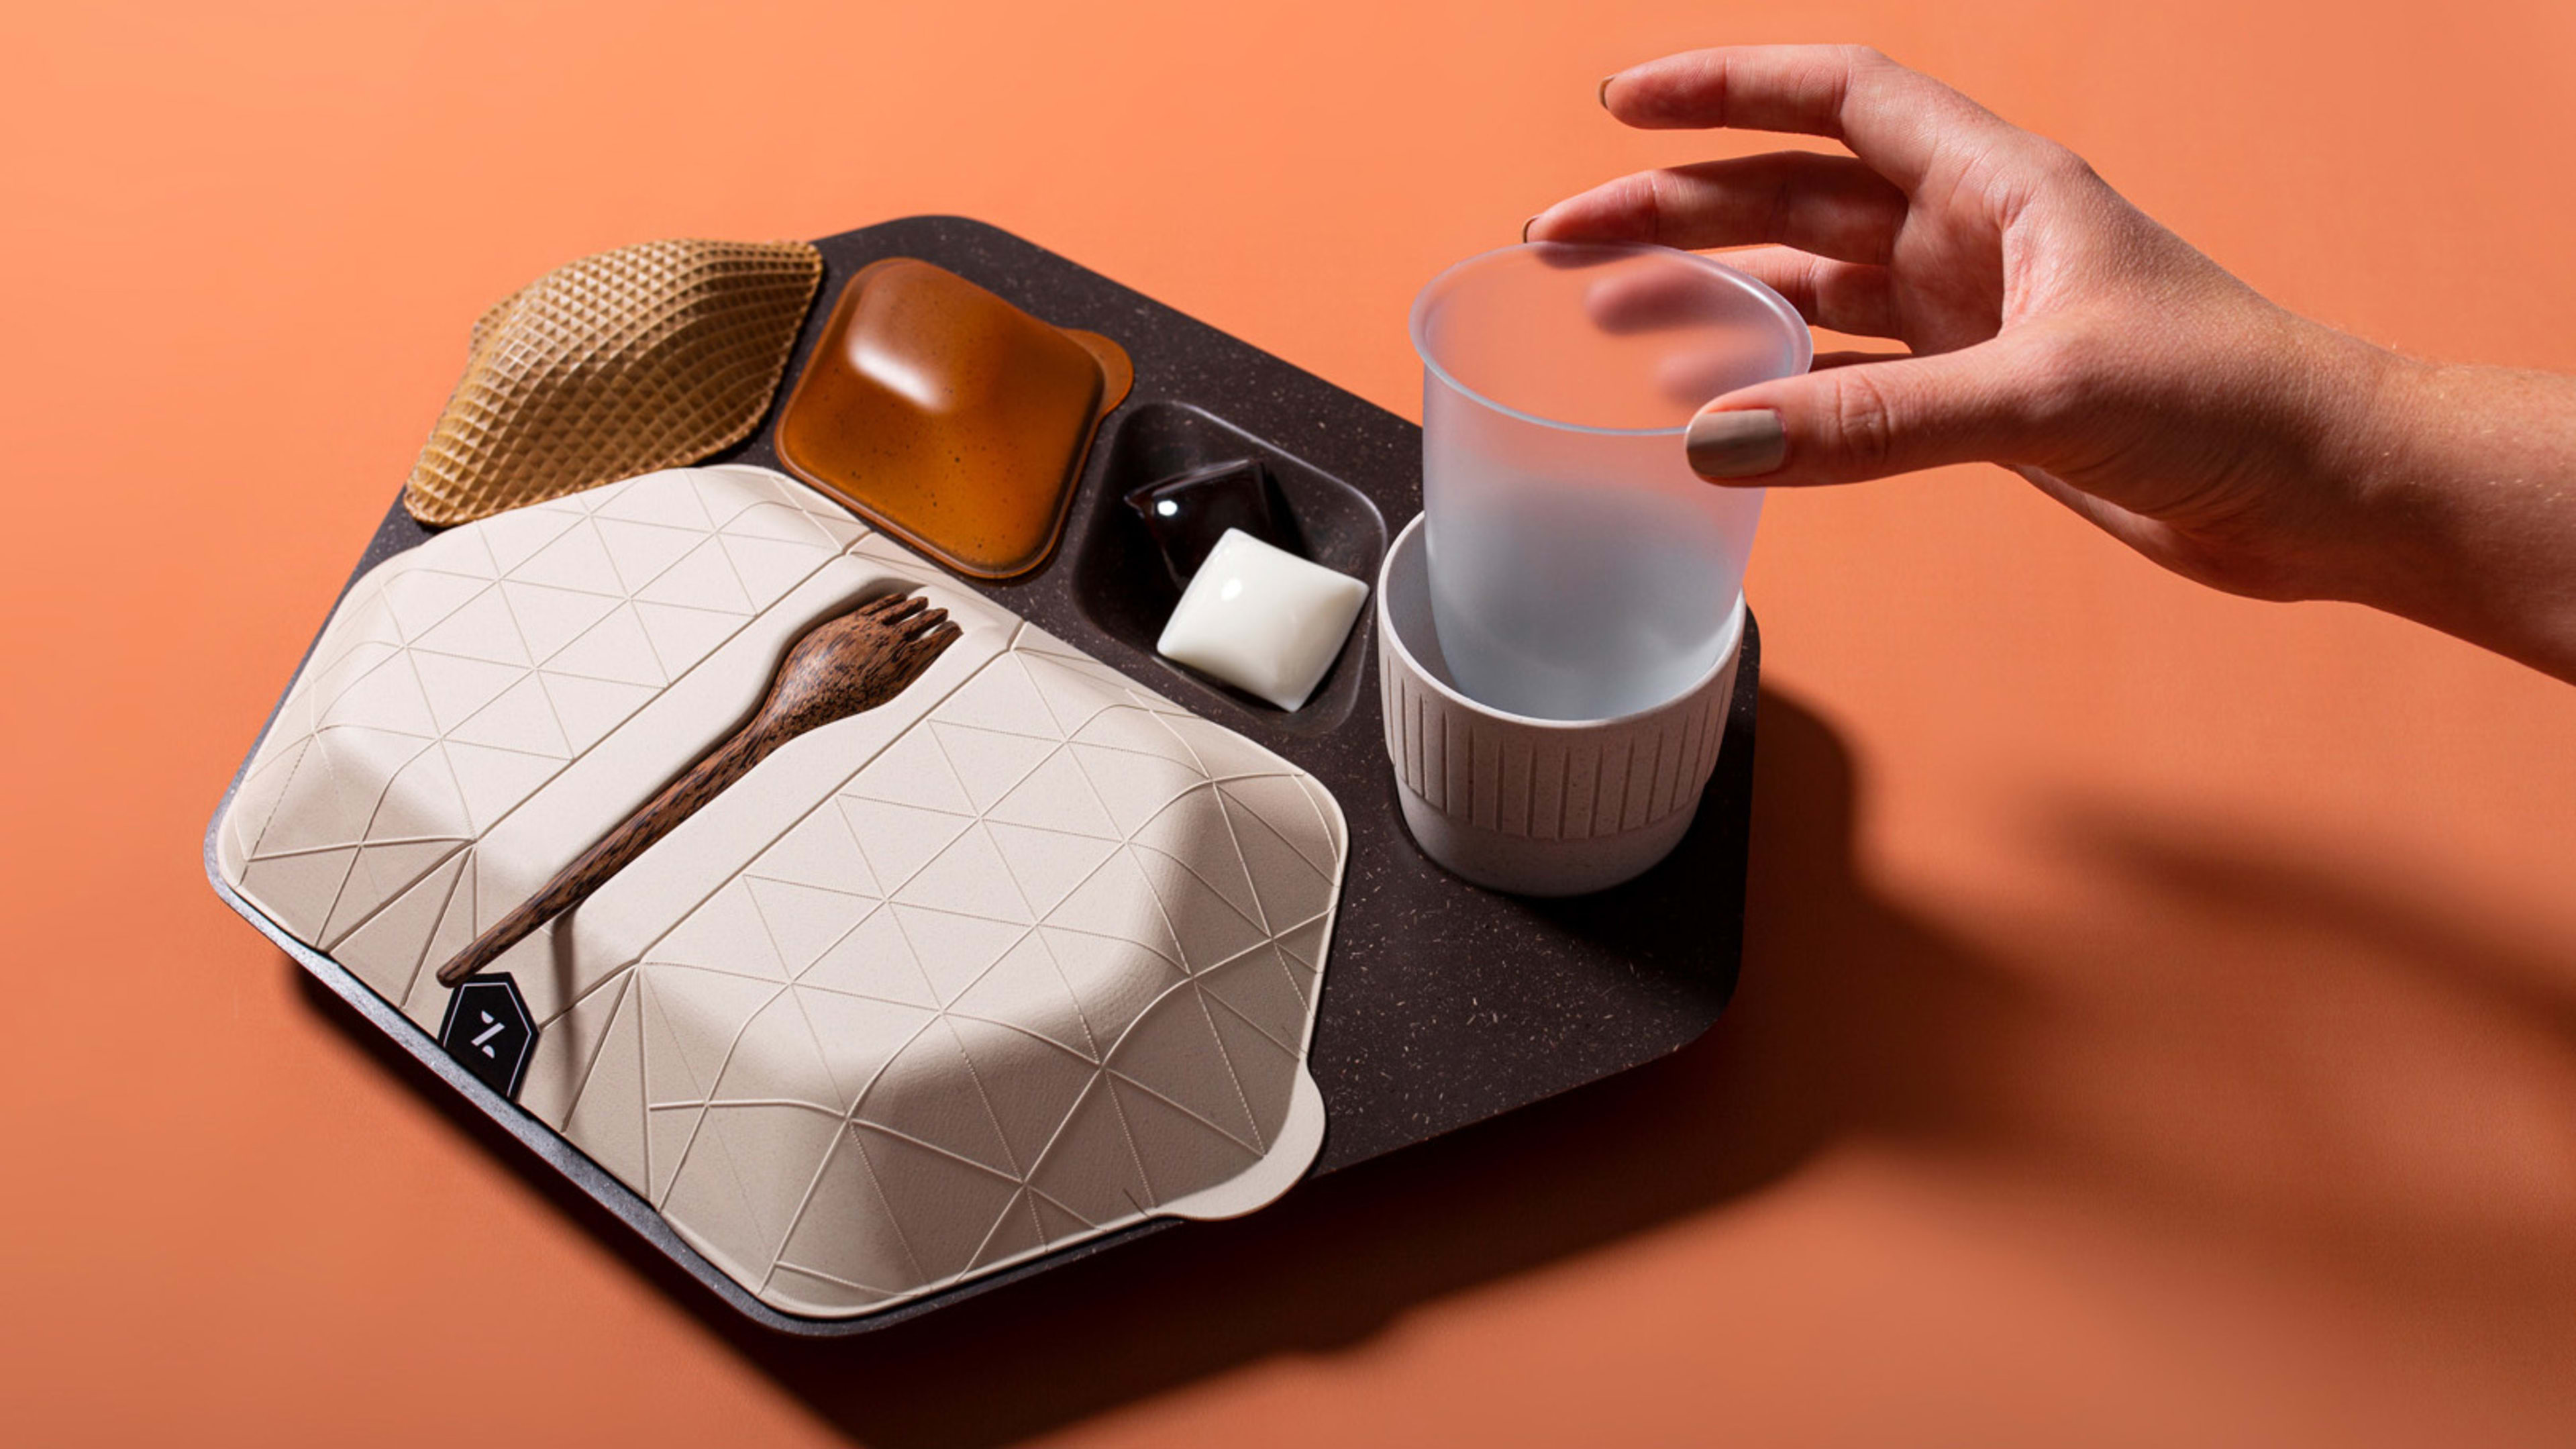 These redesigned airplane amenities could change how we fly